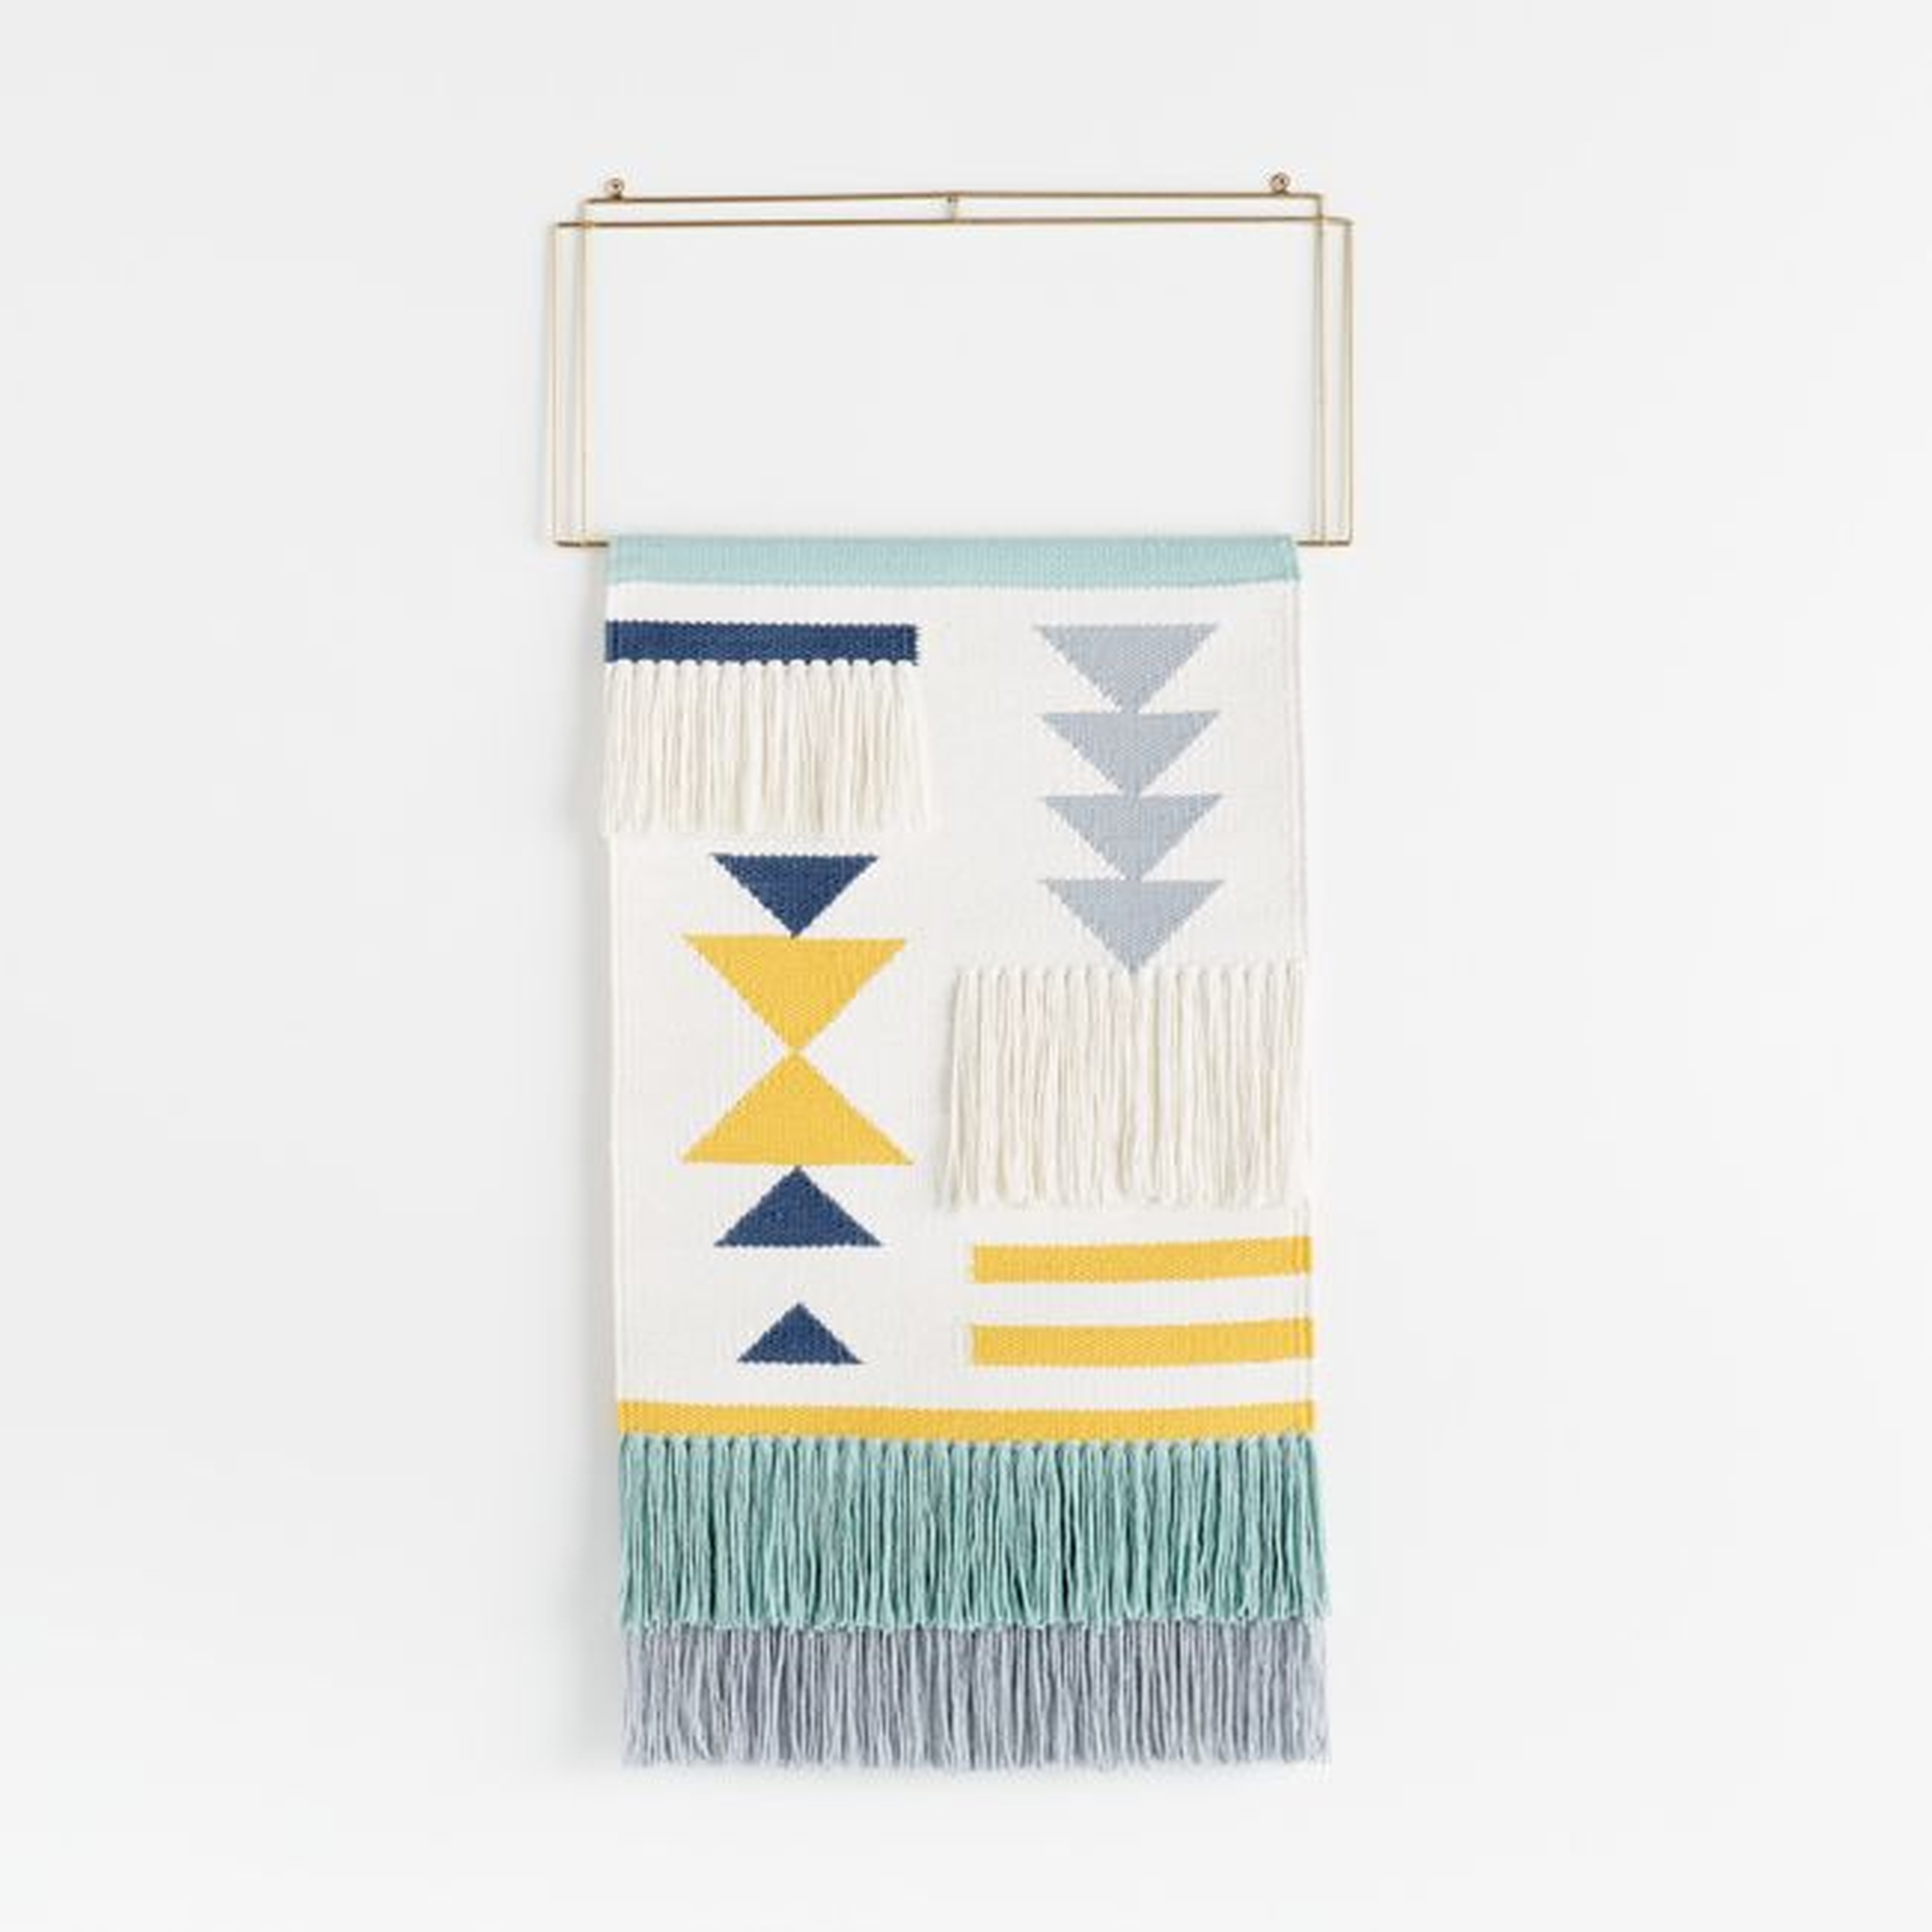 Hanging Woven Wall Decor - Crate and Barrel